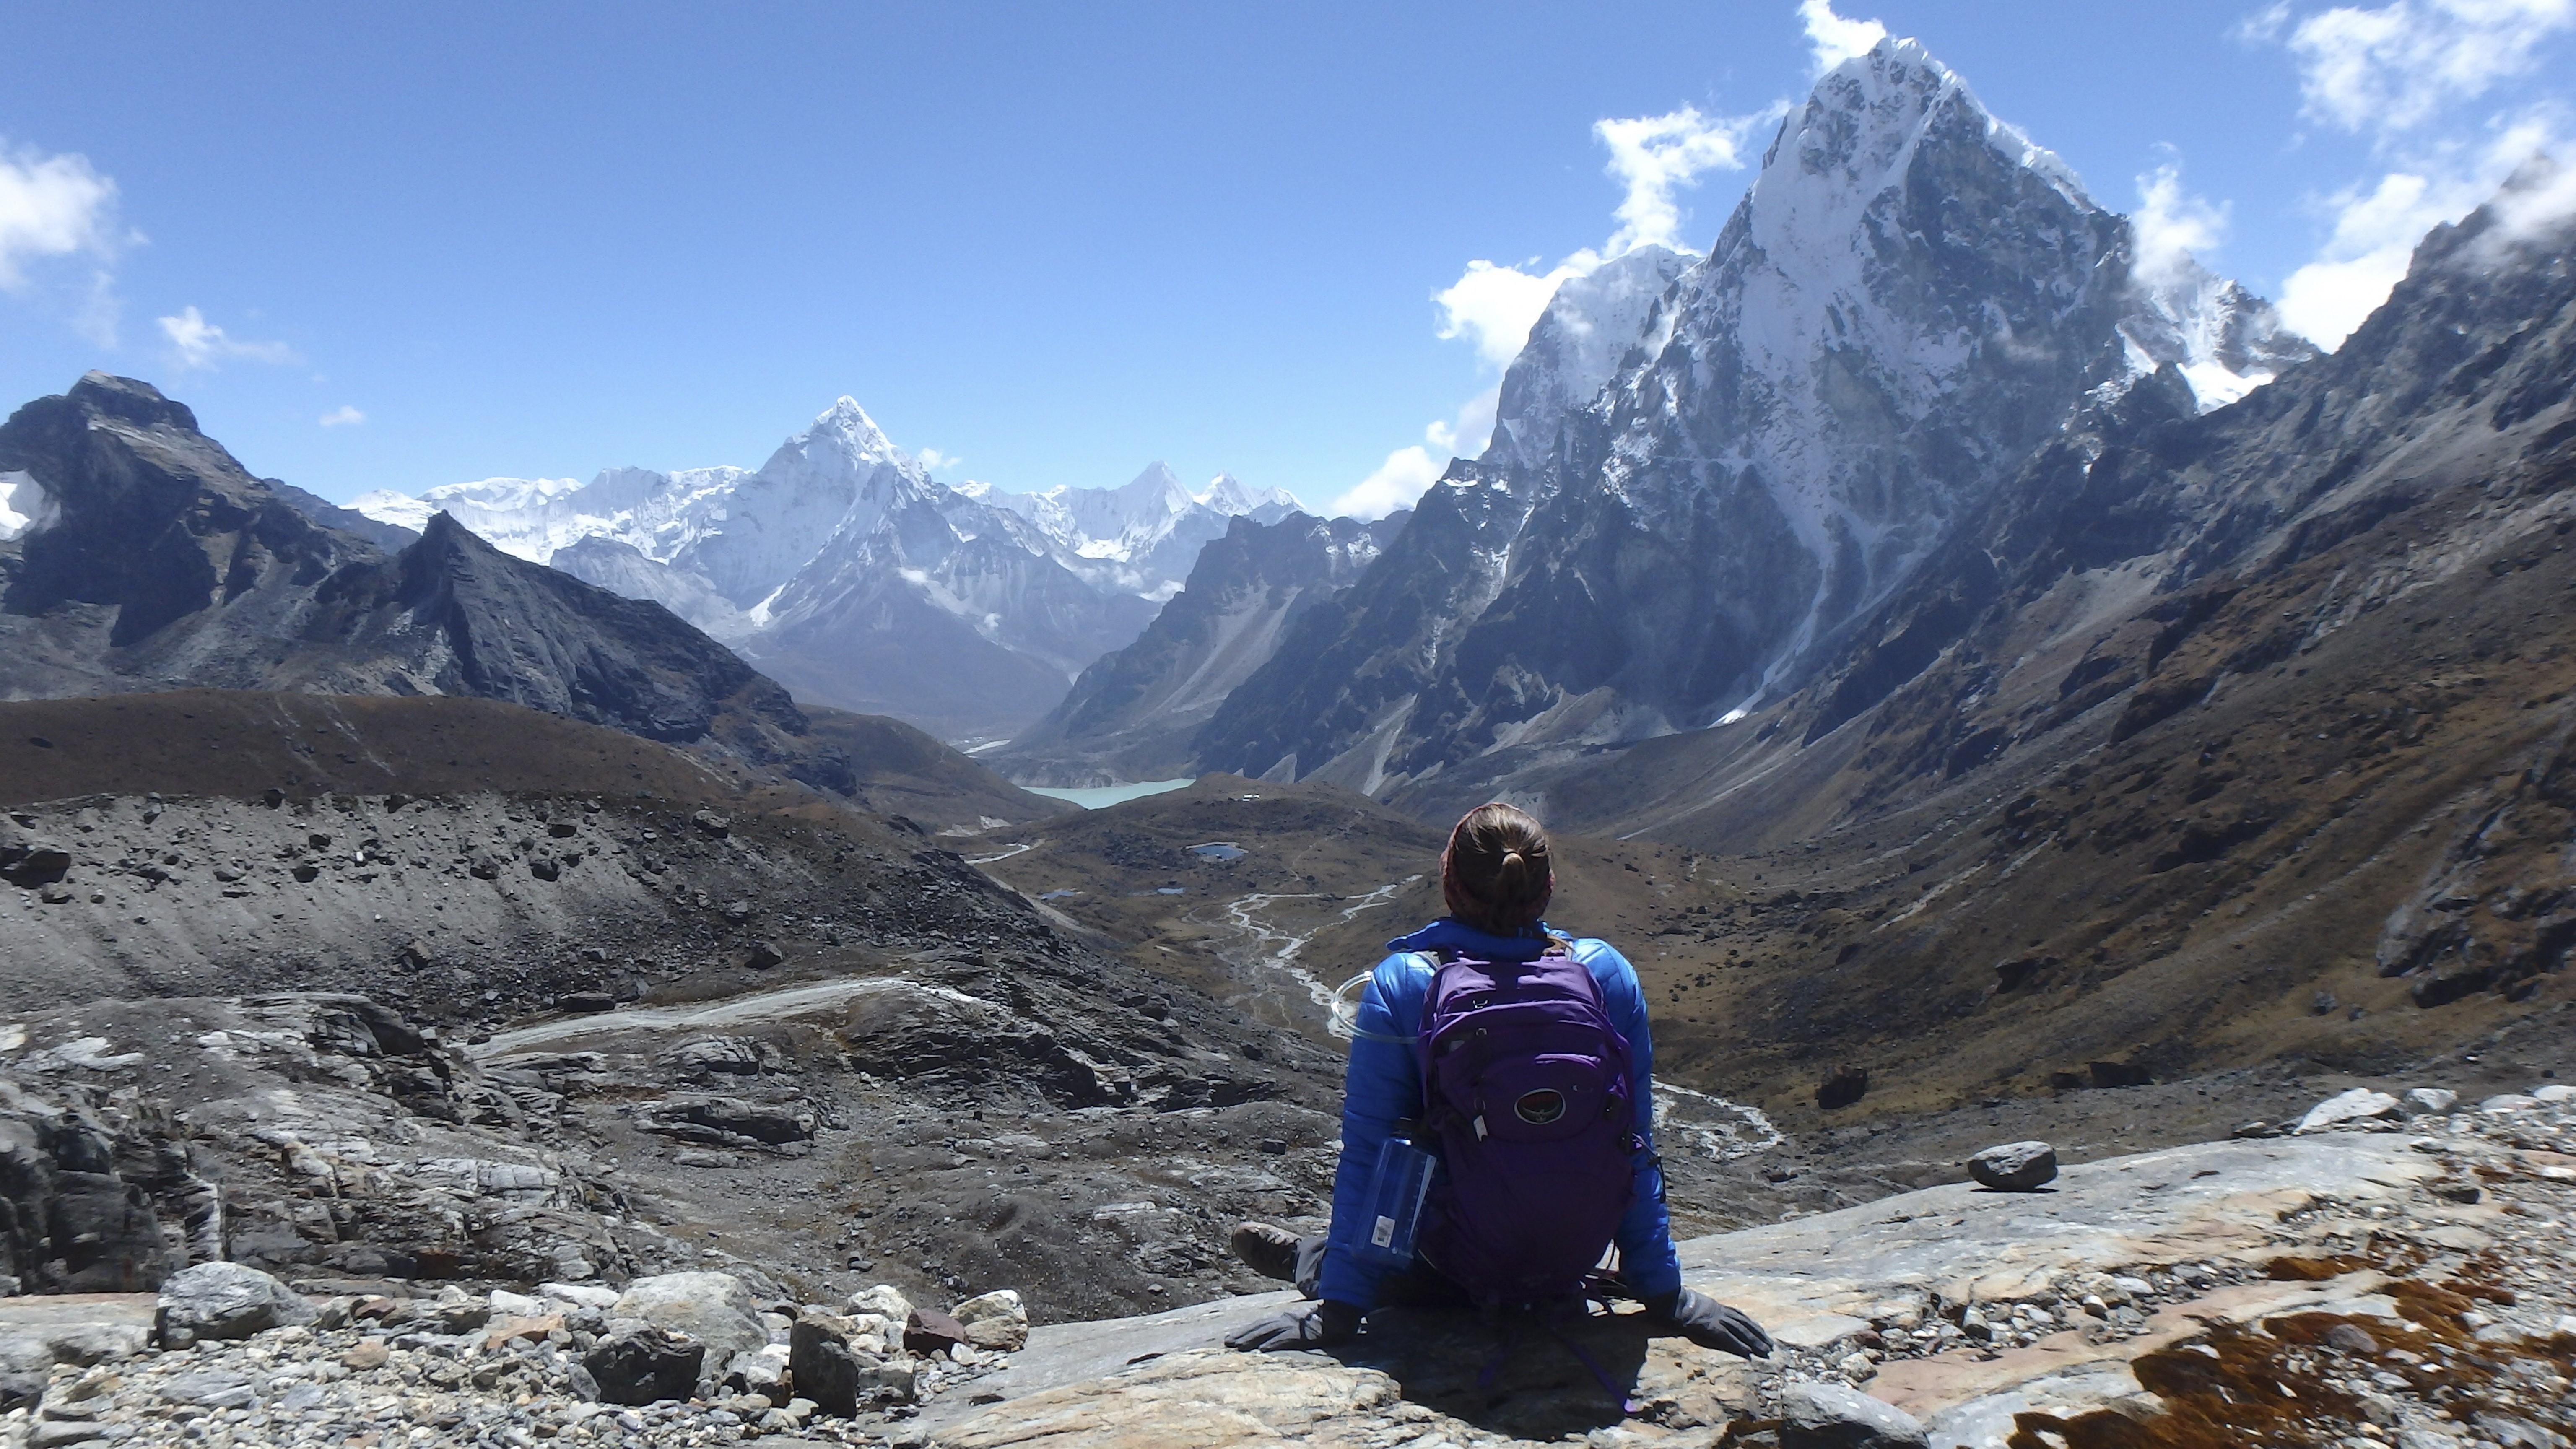 Self-guided trekking through places such as the Himalayas in Nepal are becoming more popular with travellers seeking adventure – but who still want a backup plan. Photo: Marcelle Barnett and World Expedition